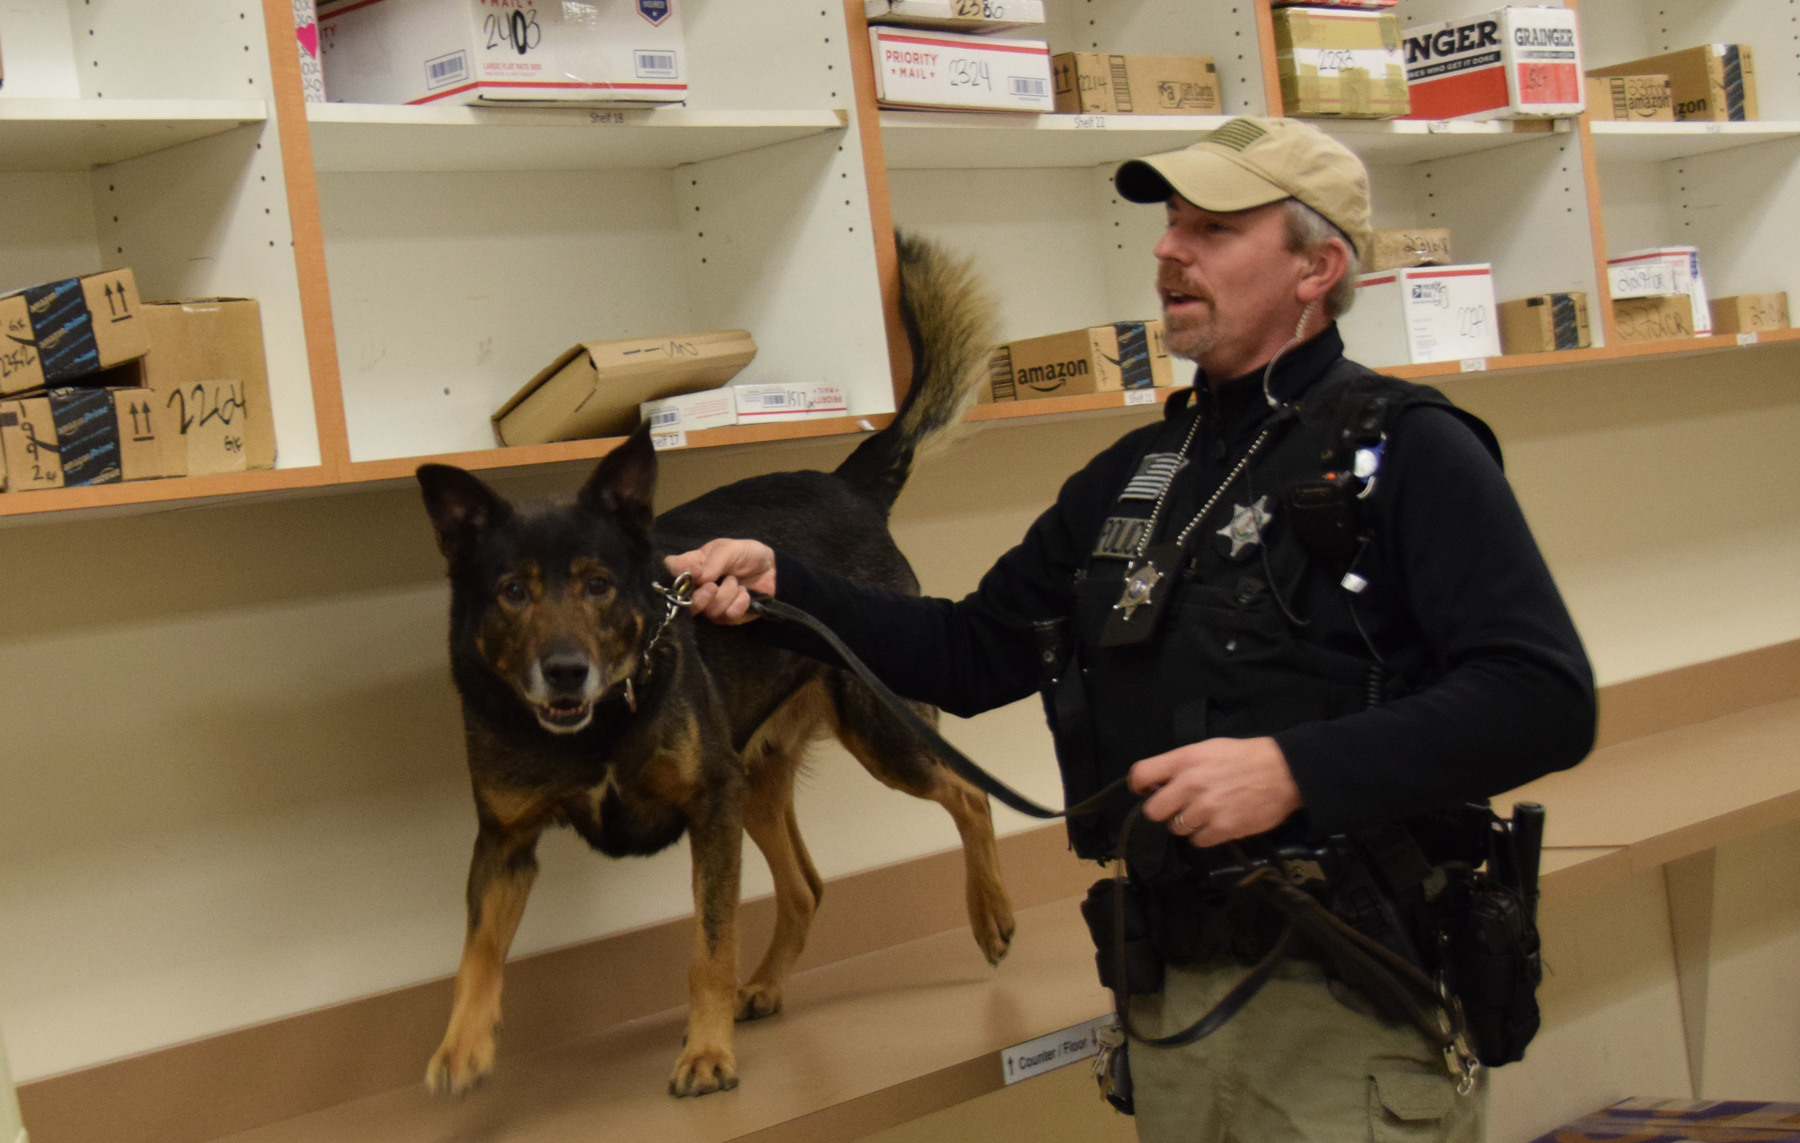 Quinty and his handler, Officer Doug Beckman, search a campus mailroom for packages filled with narcotics on March 2, 2016.